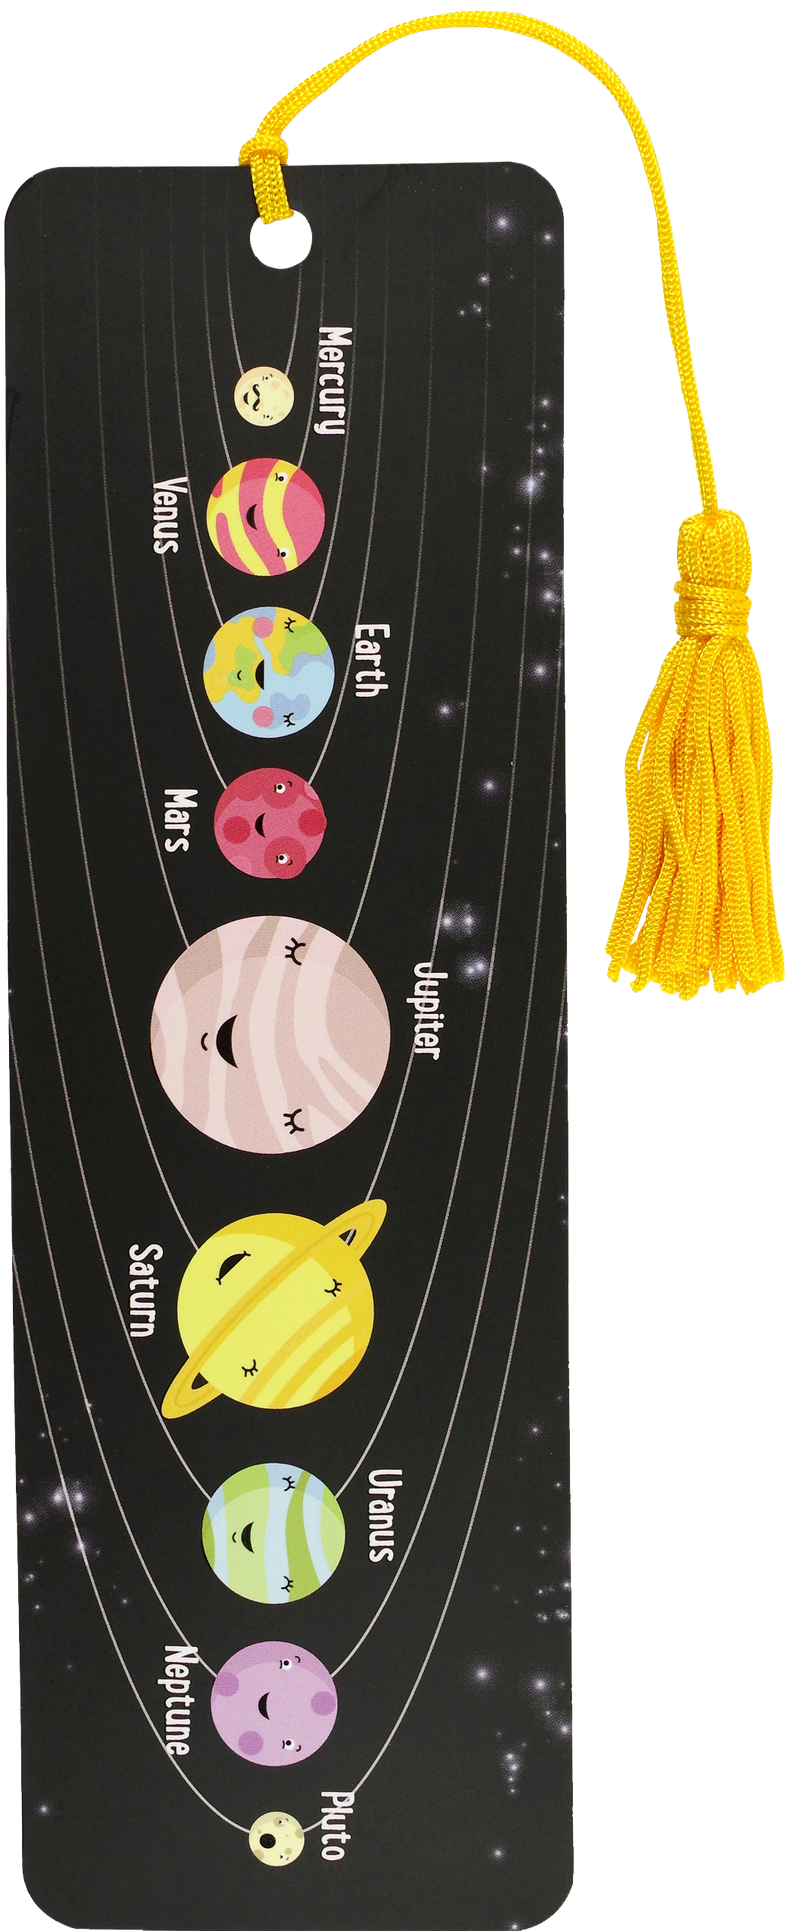 Solar System Youth Bookmark